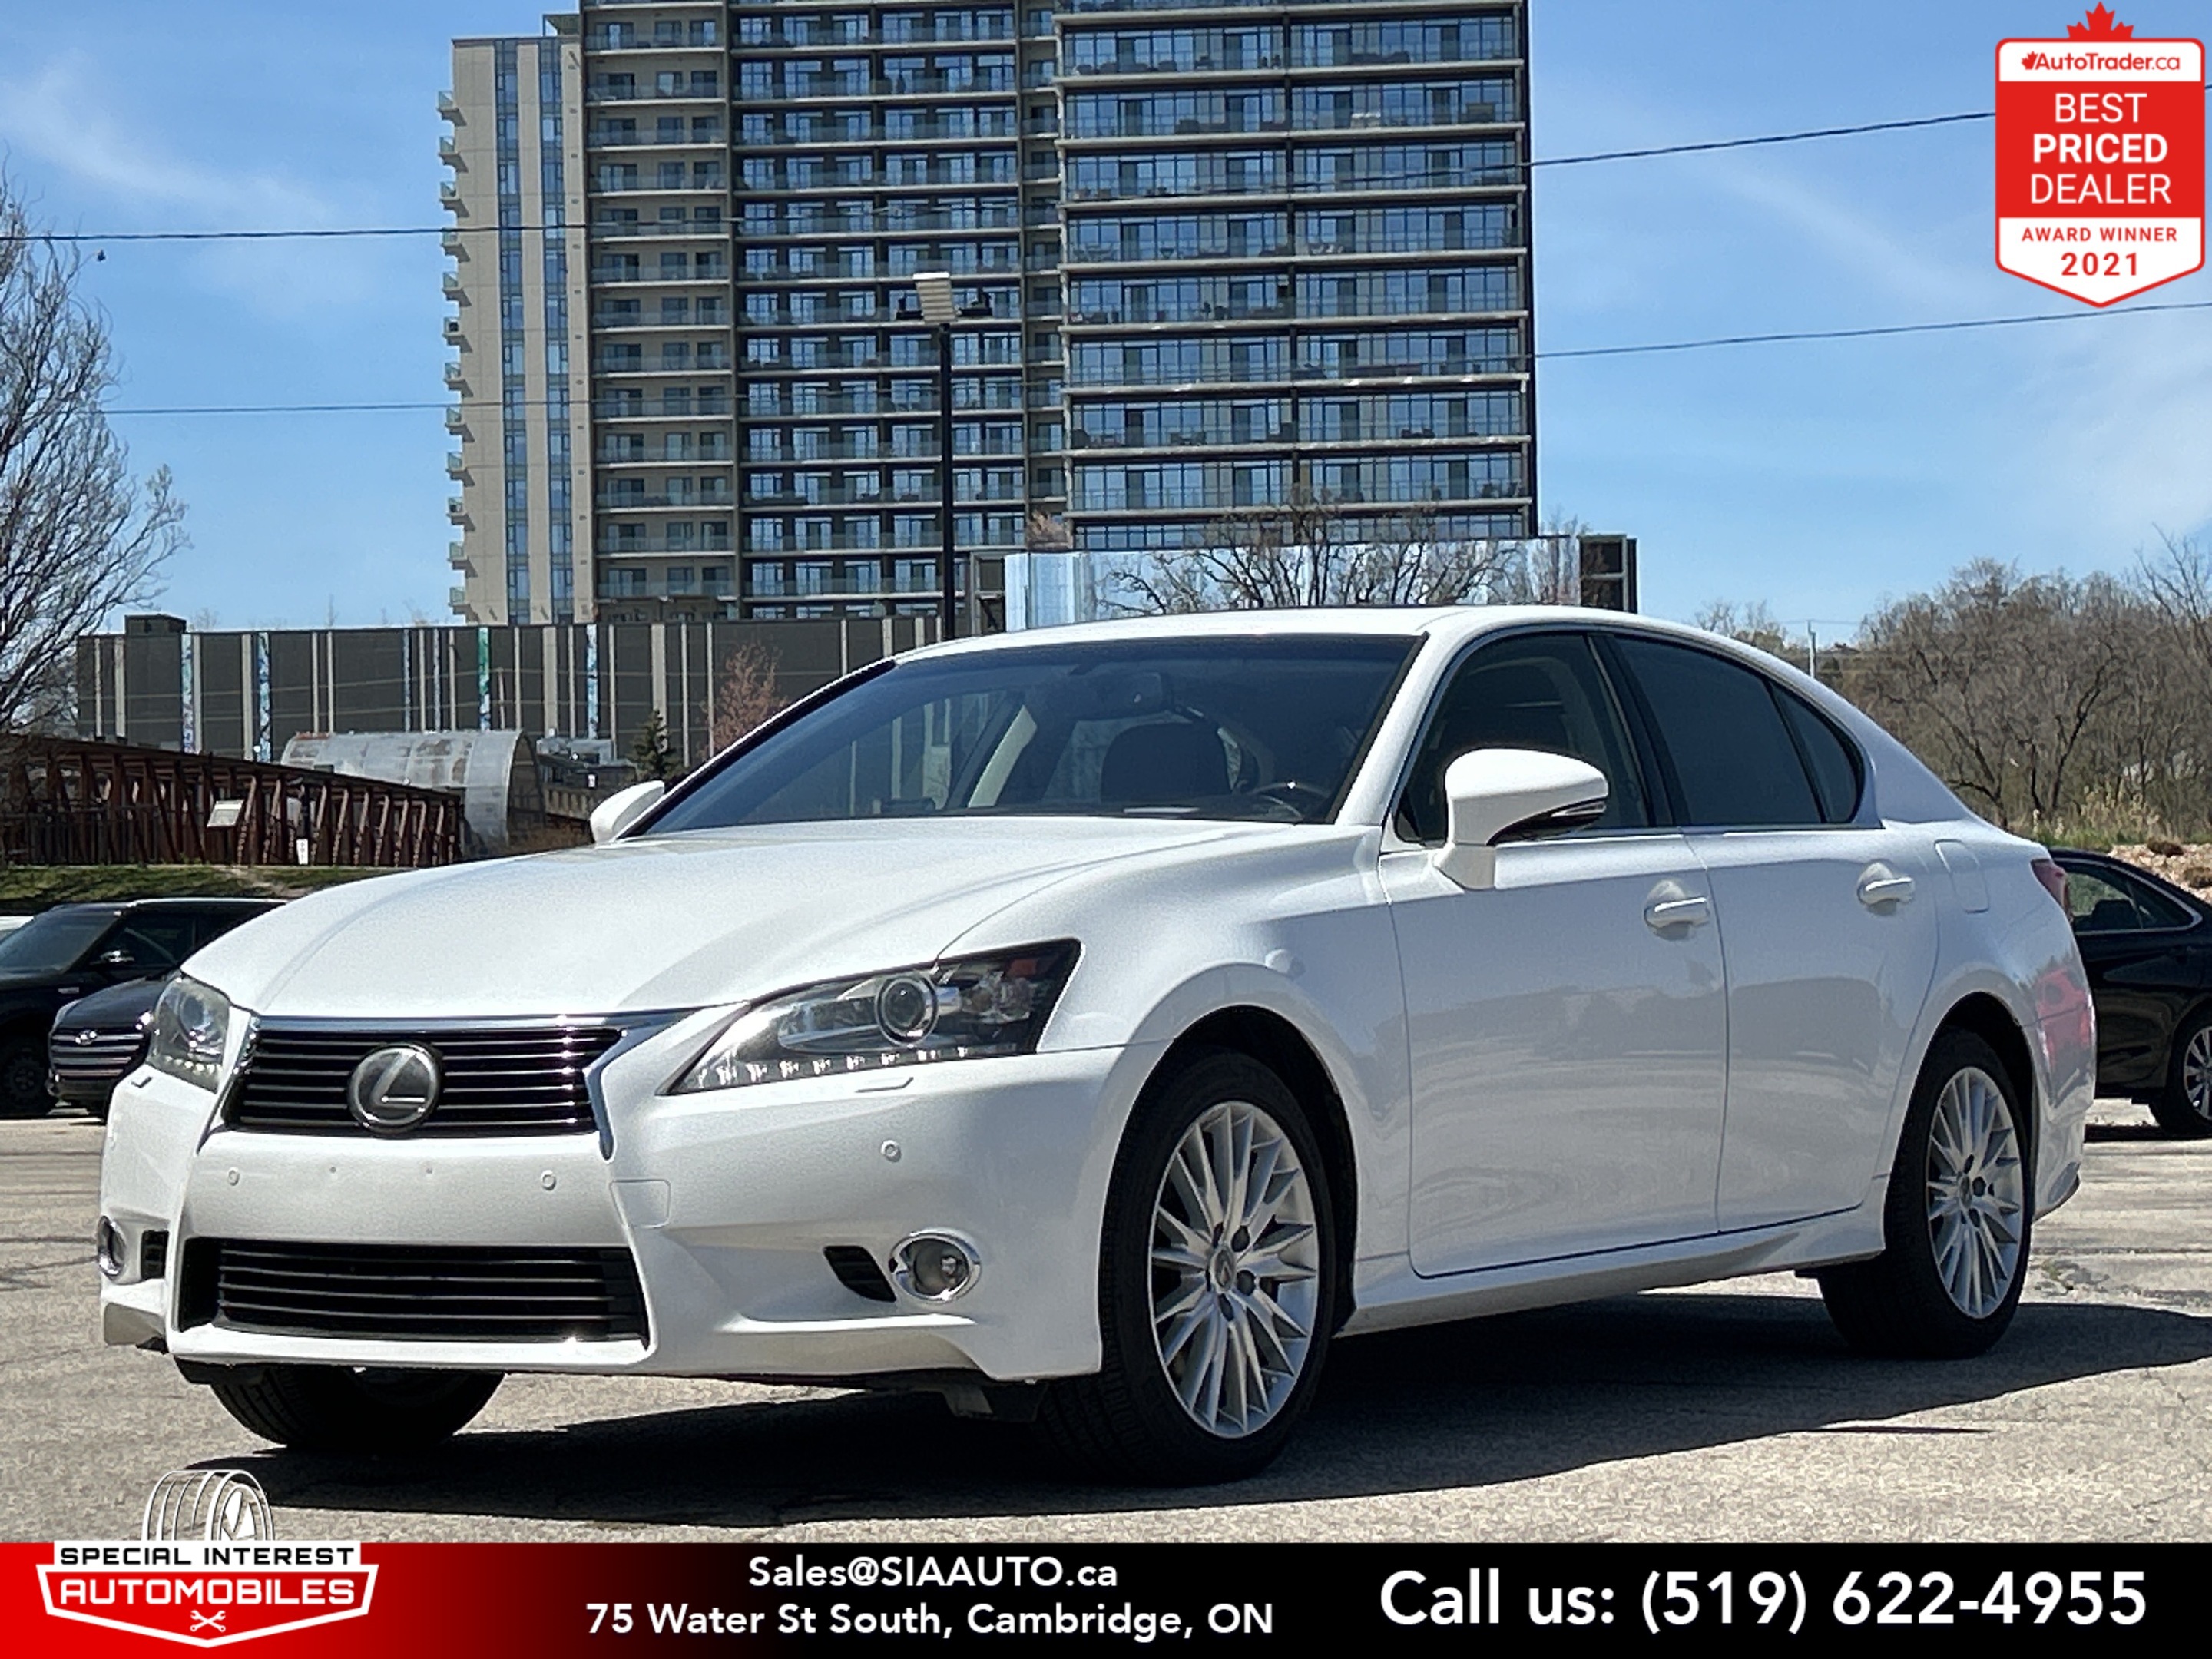 2013 Lexus GS 350 4dr Sdn AWD * Accident Free * Sunroof * Certified